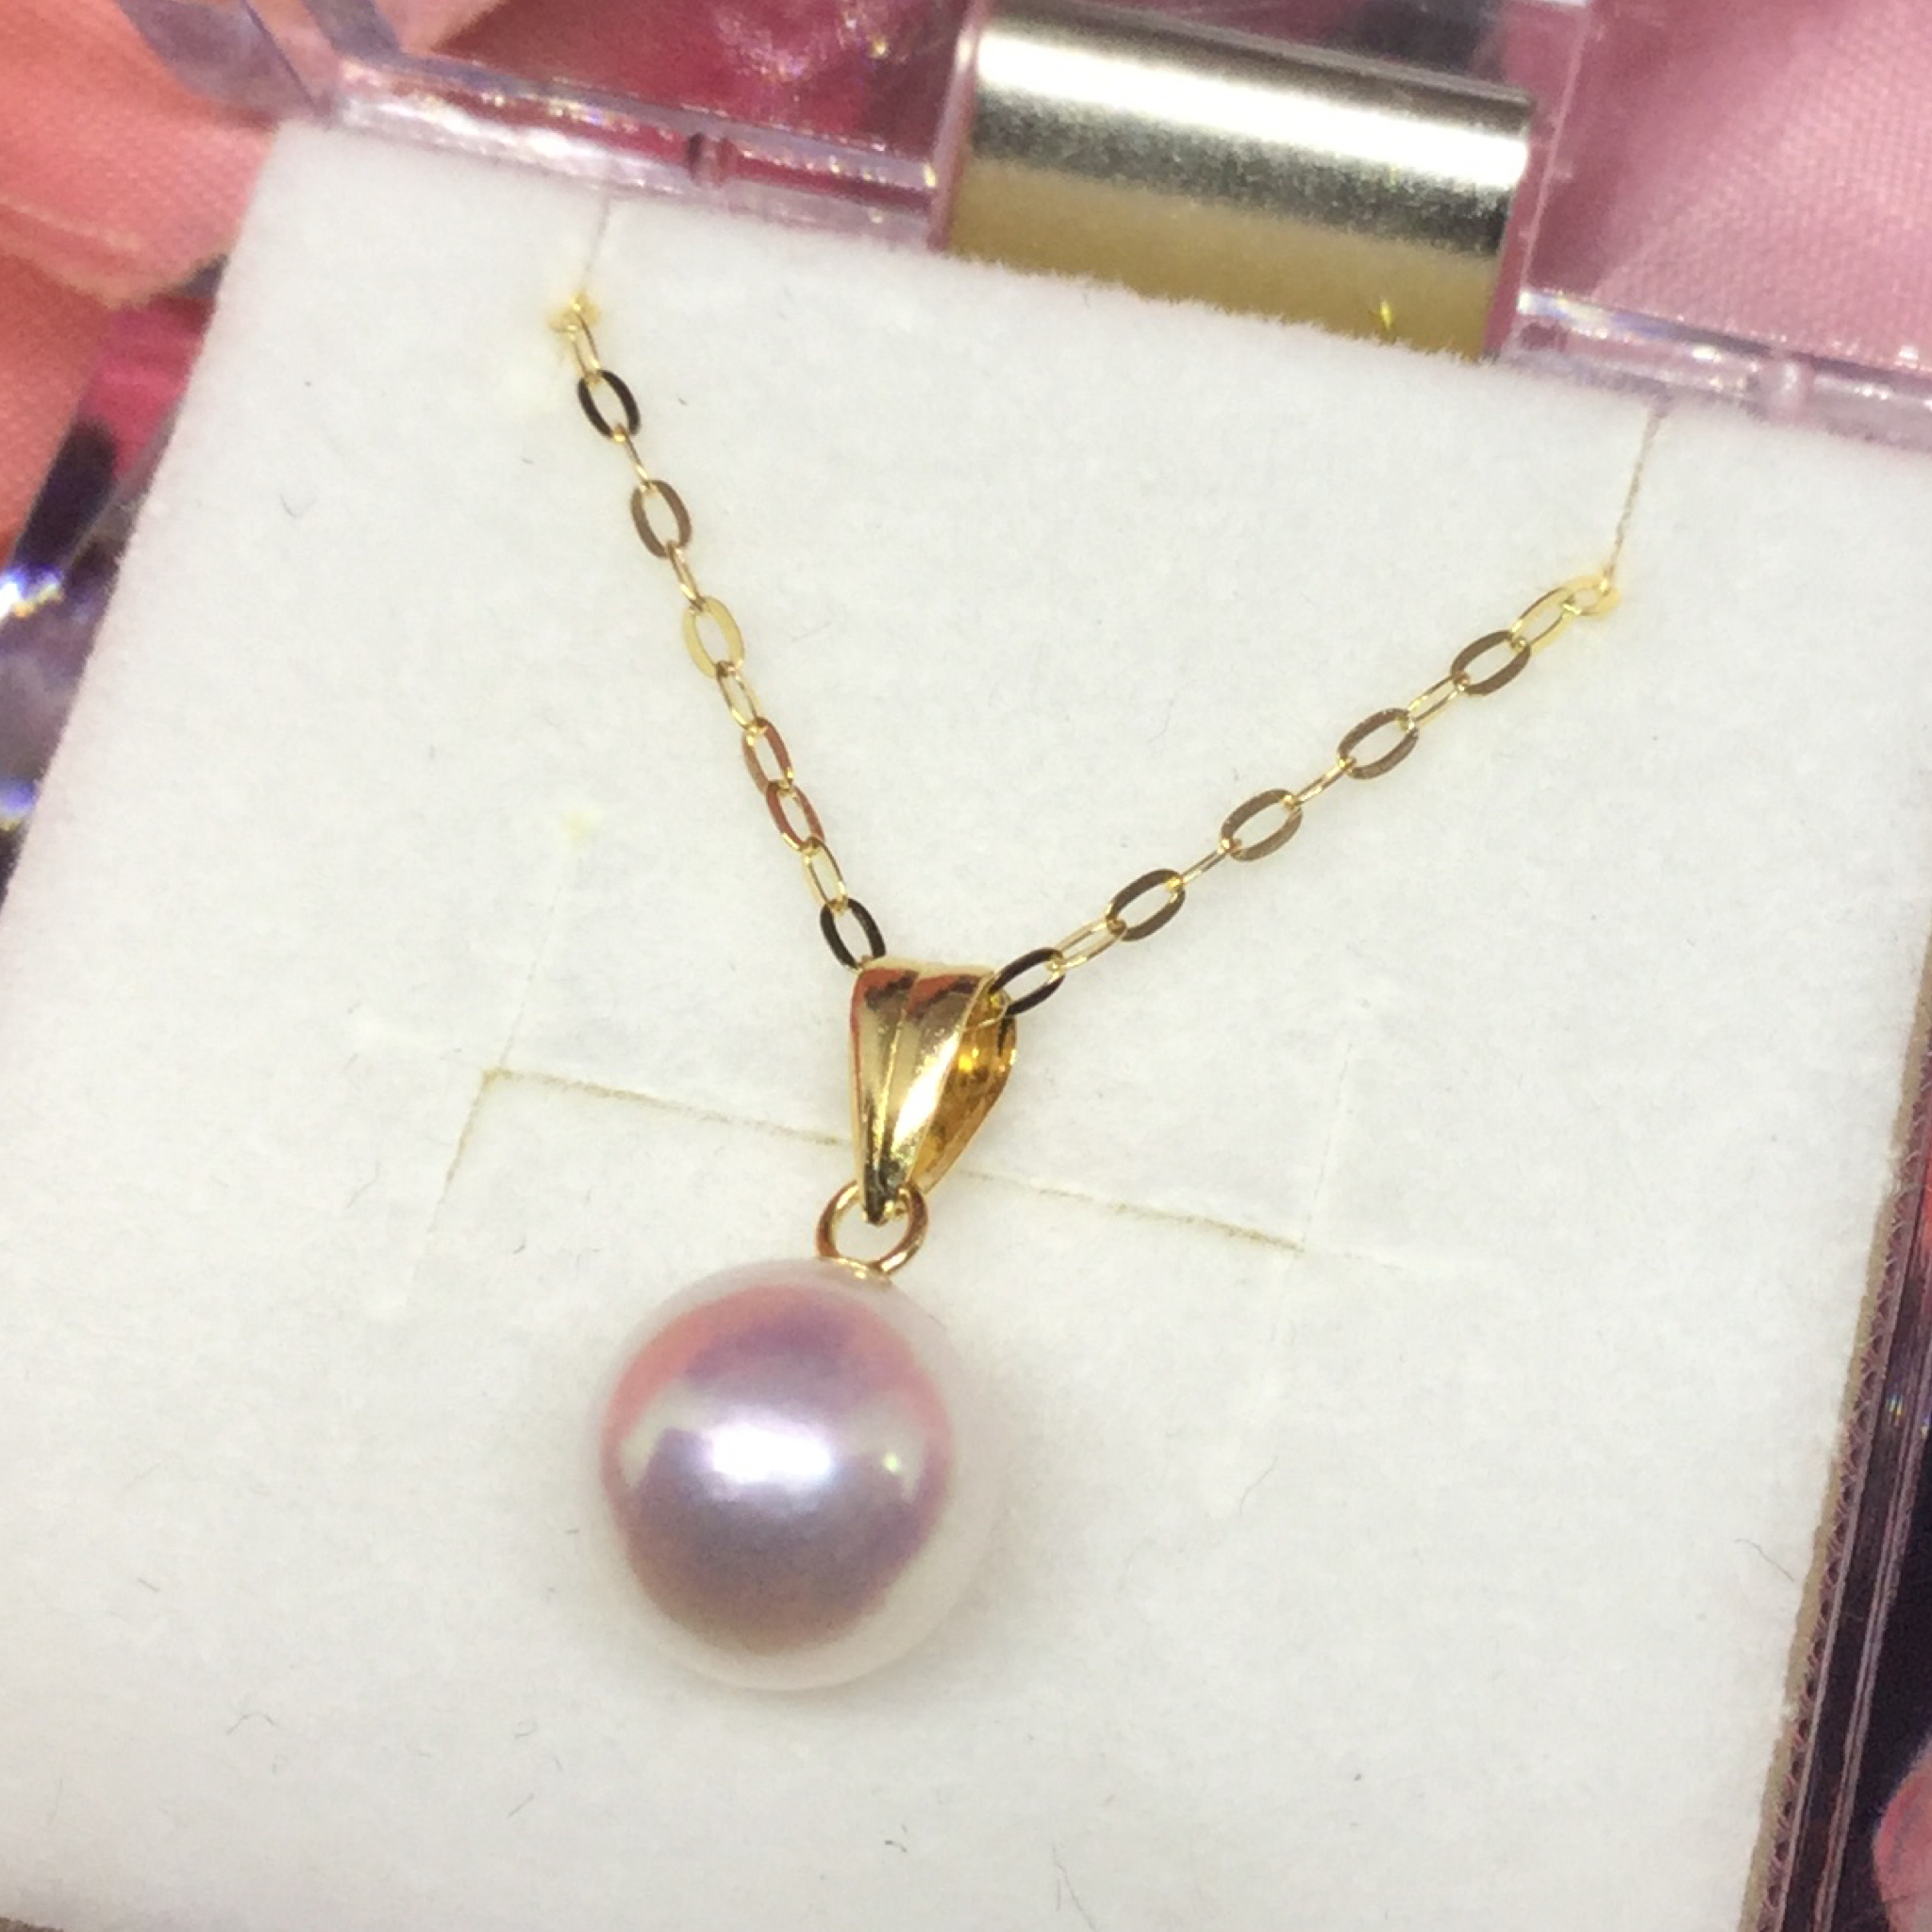 K18 アコヤ 真珠 パールネックレス / K18 7mm akoya pearl necklace | A.I JEWELRIES / エイ